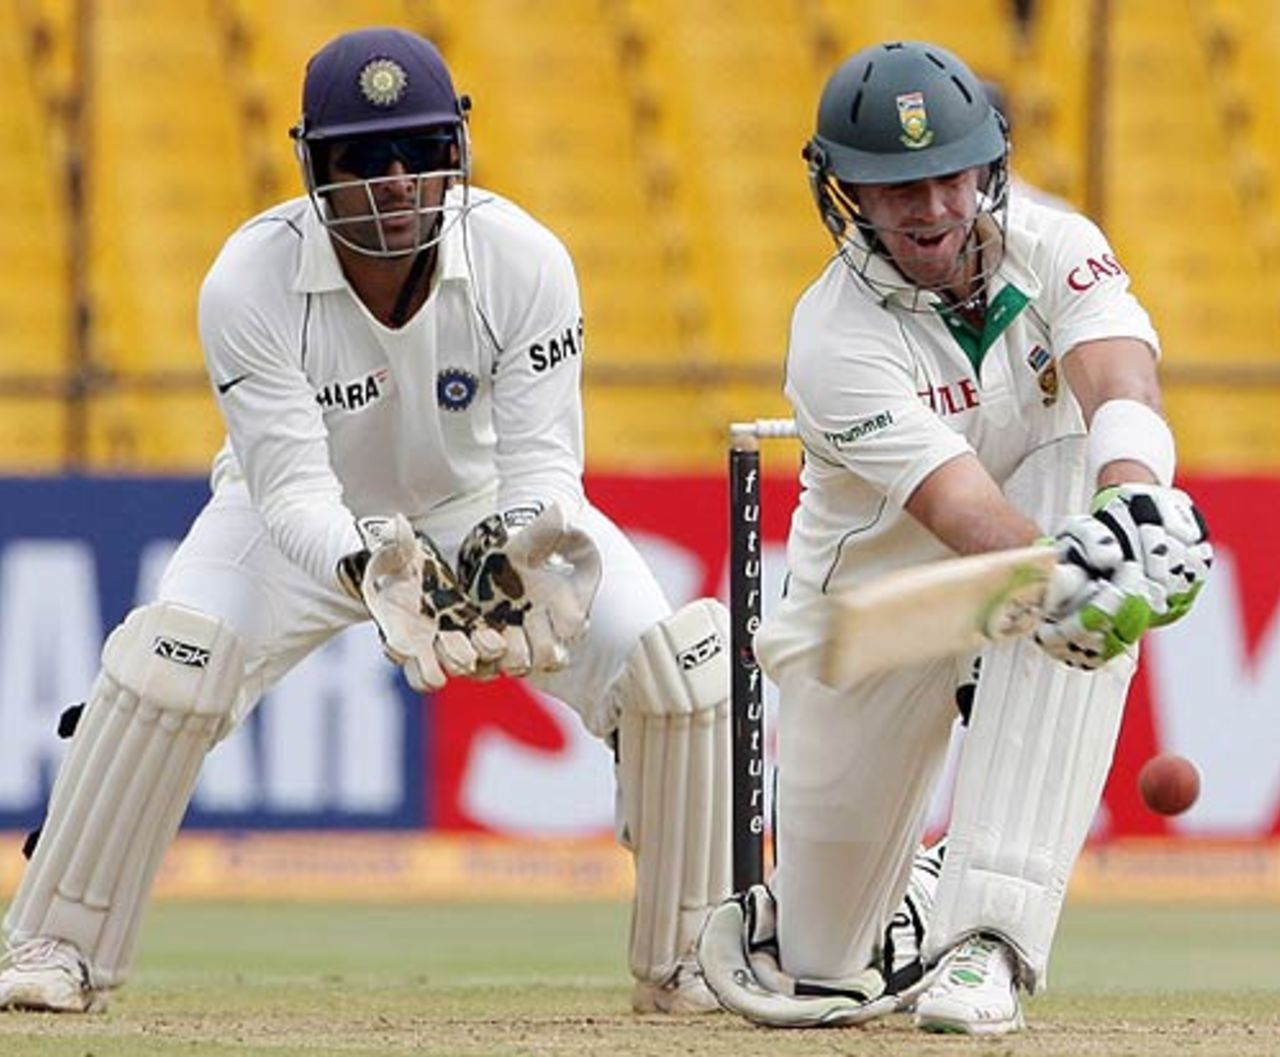 AB de Villiers sweeps on the way to South Africa's highest individual score in India, India v South Africa, 2nd Test, Ahmedabad, 2nd day, April 4, 2008